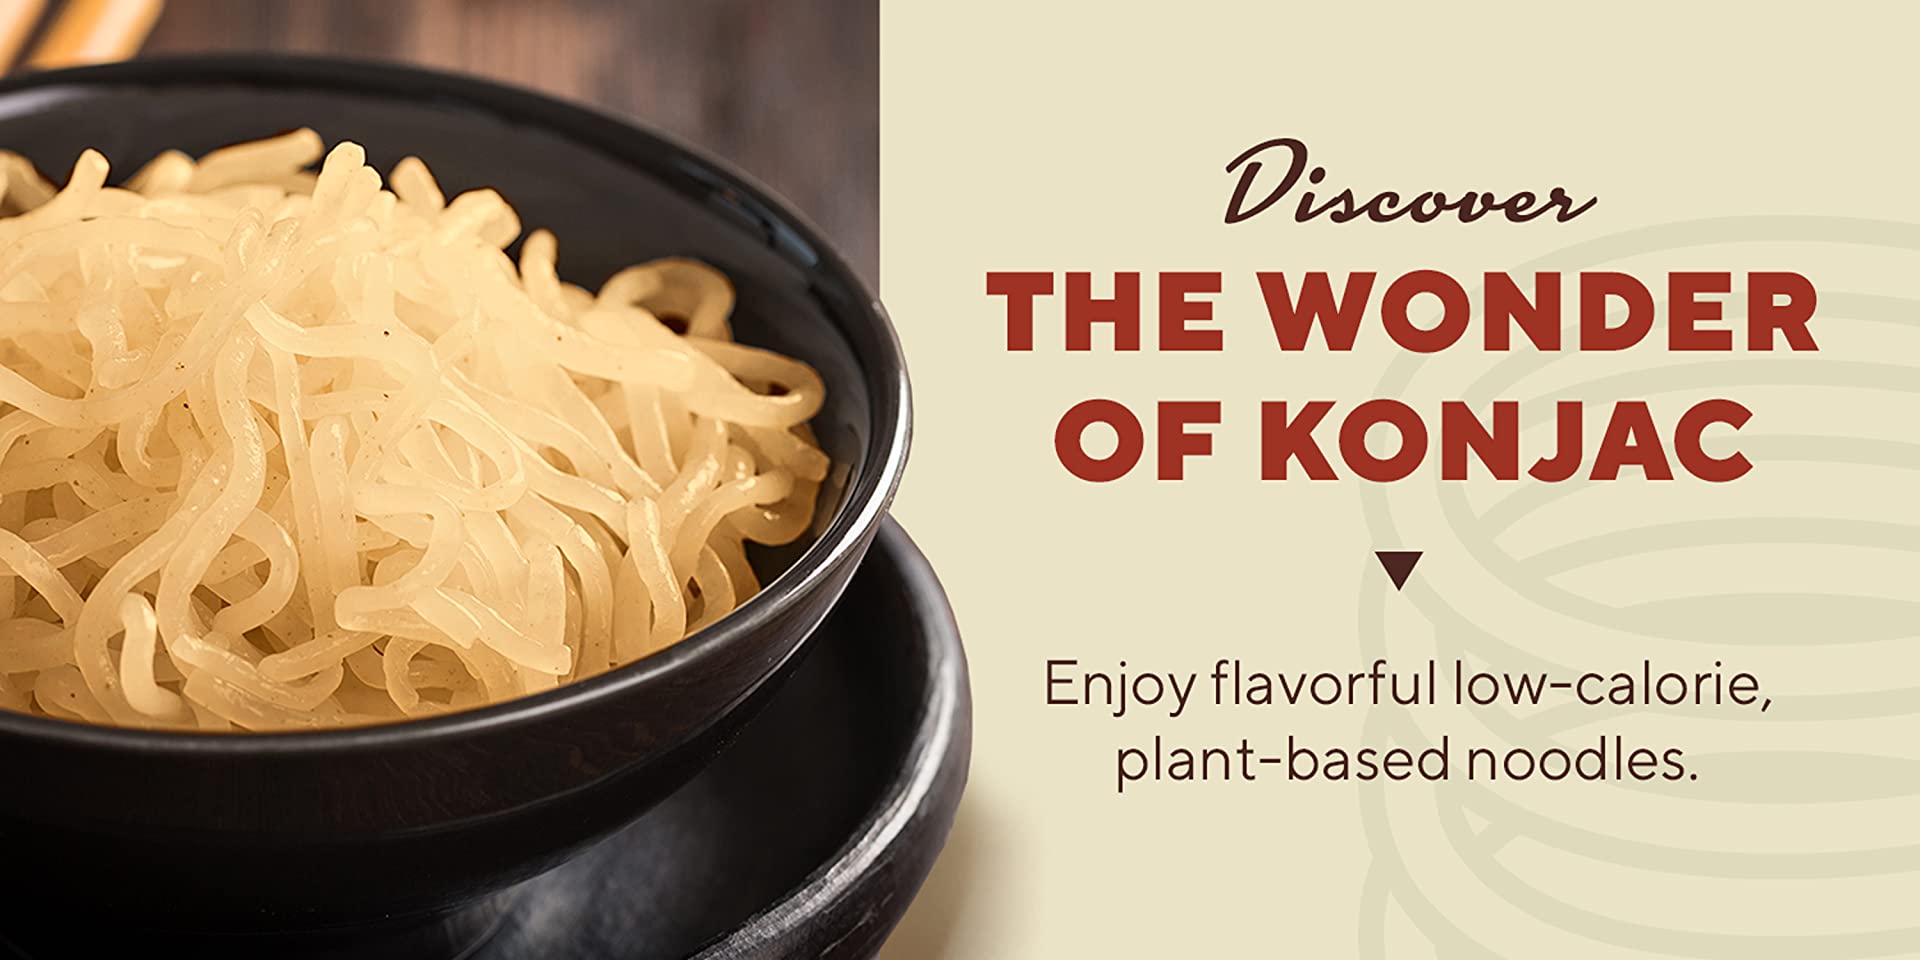 Discover the wonder of konjac.  Enjoy flavorful low-calorie, plant-based noodles.